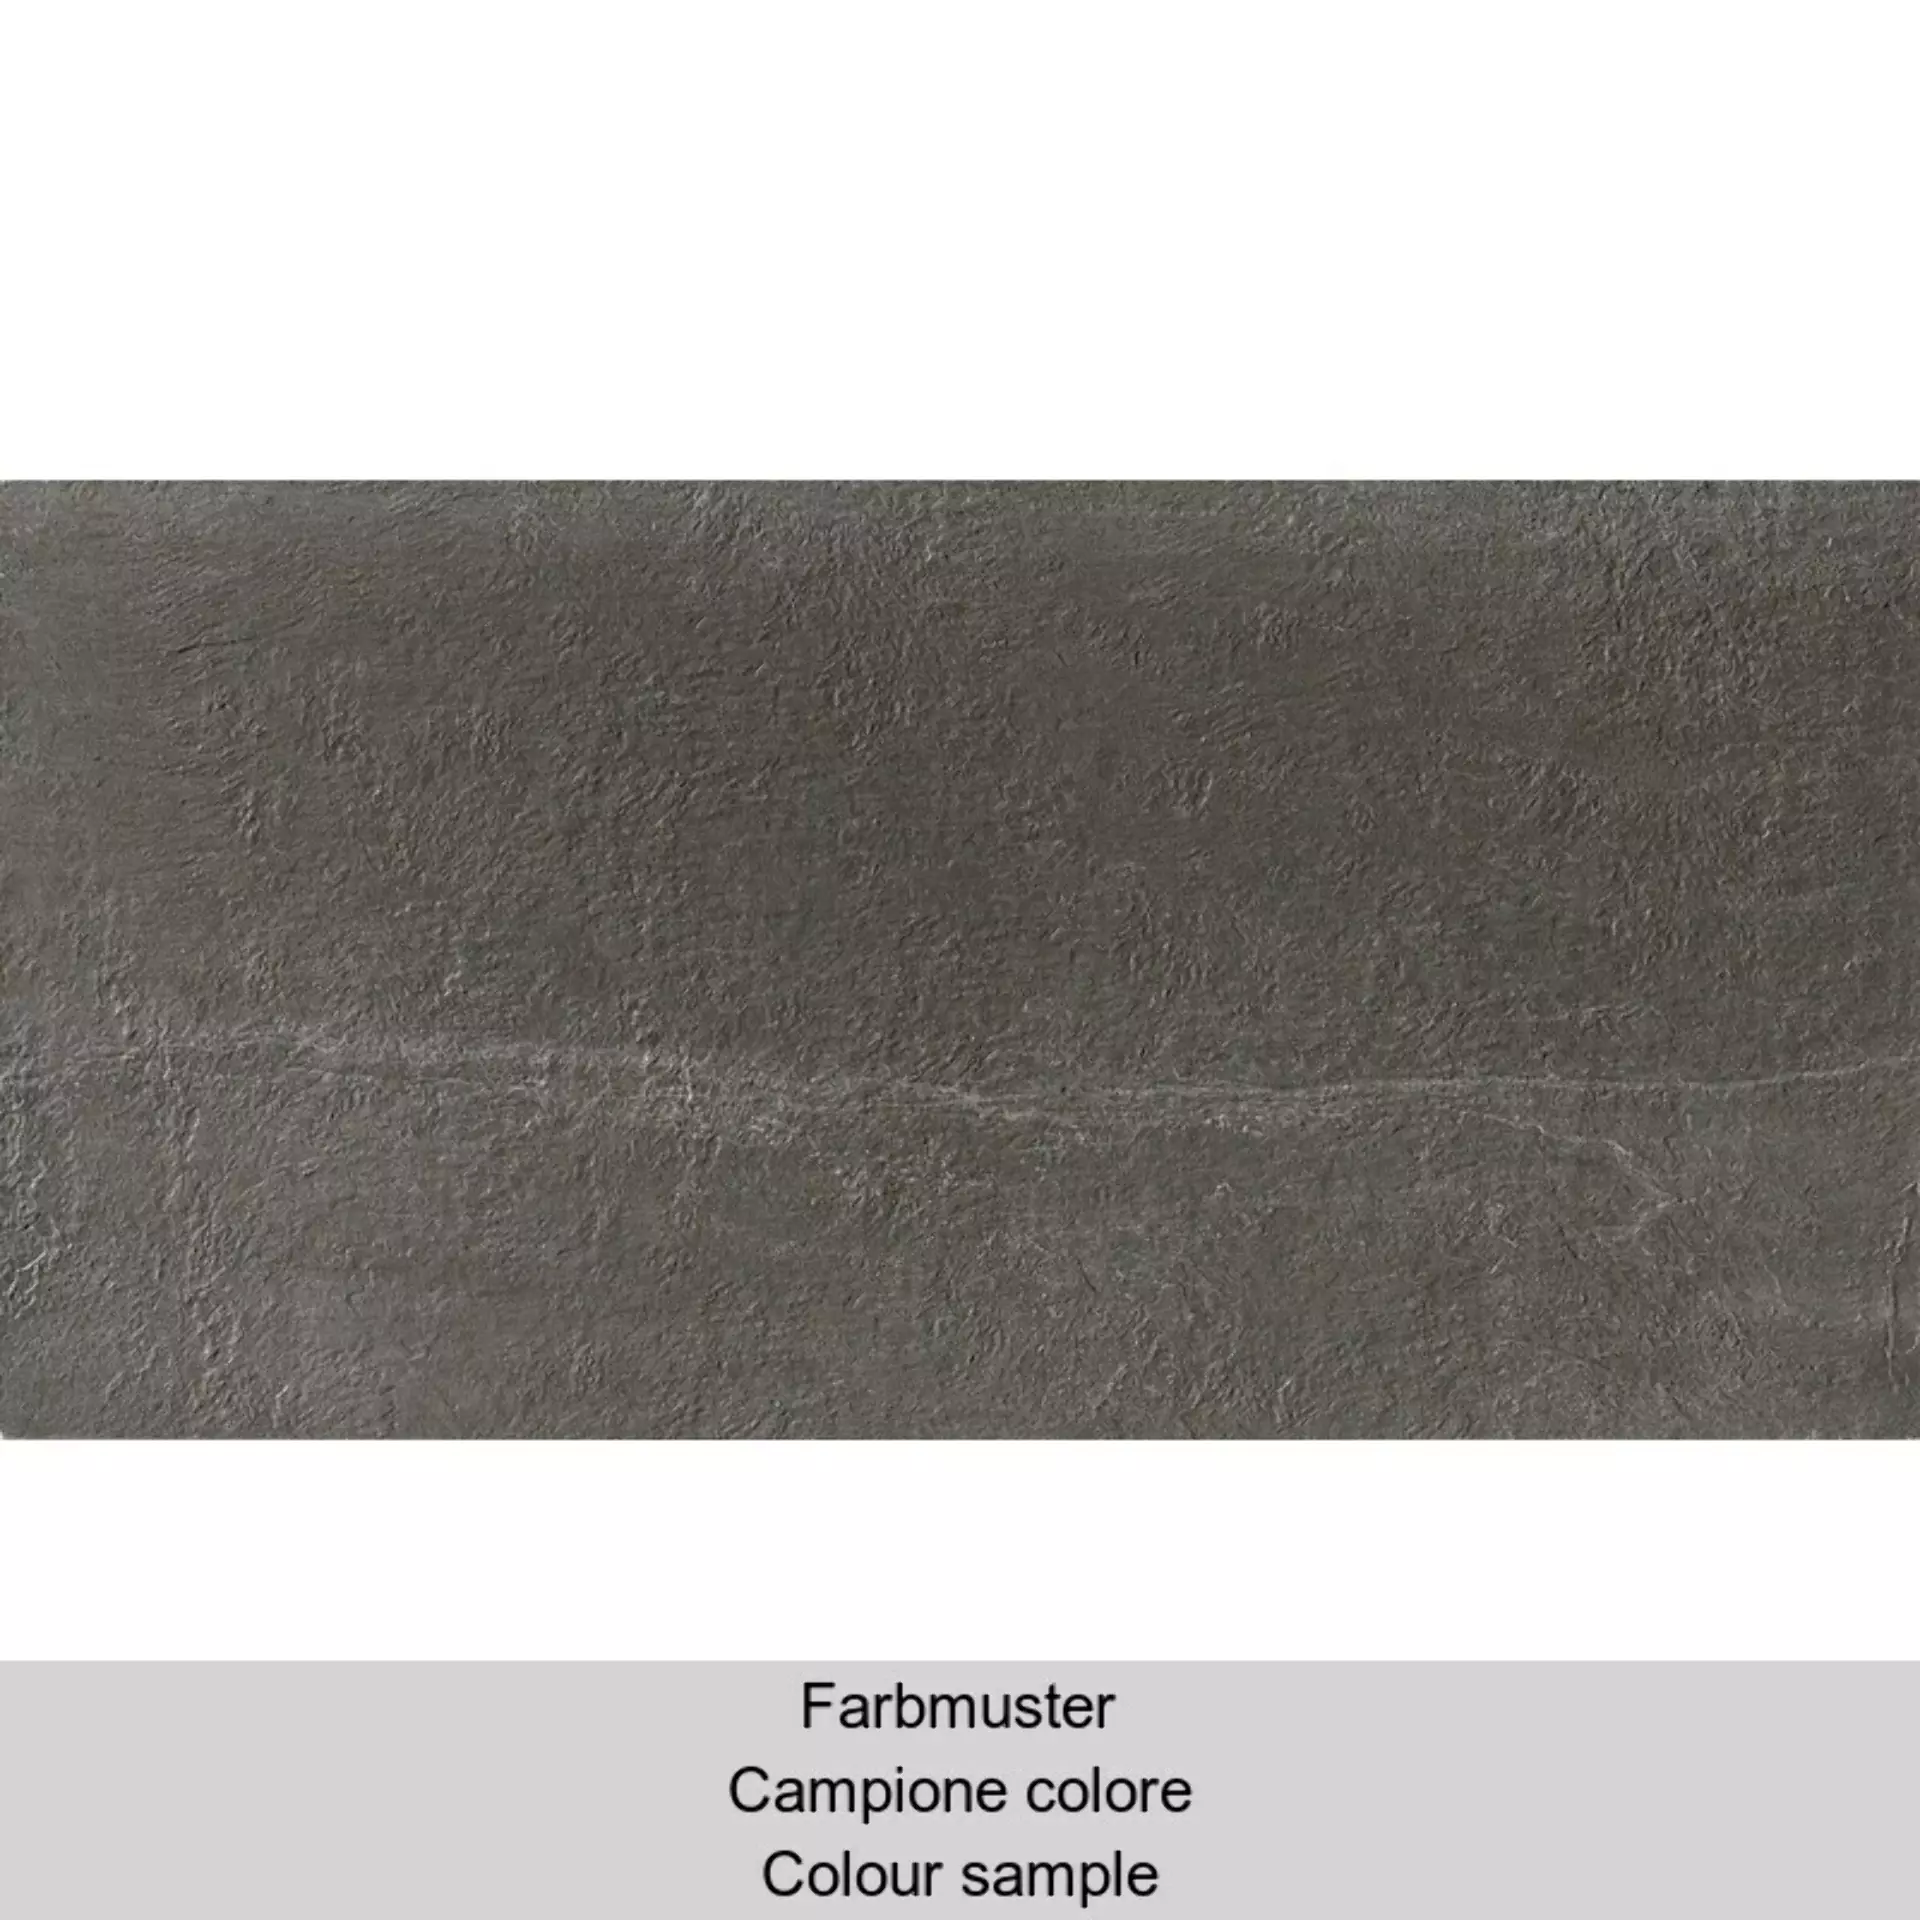 Cercom Stone Box Multicolor Selected Naturale 1058704 50x100cm rectified 8,5mm